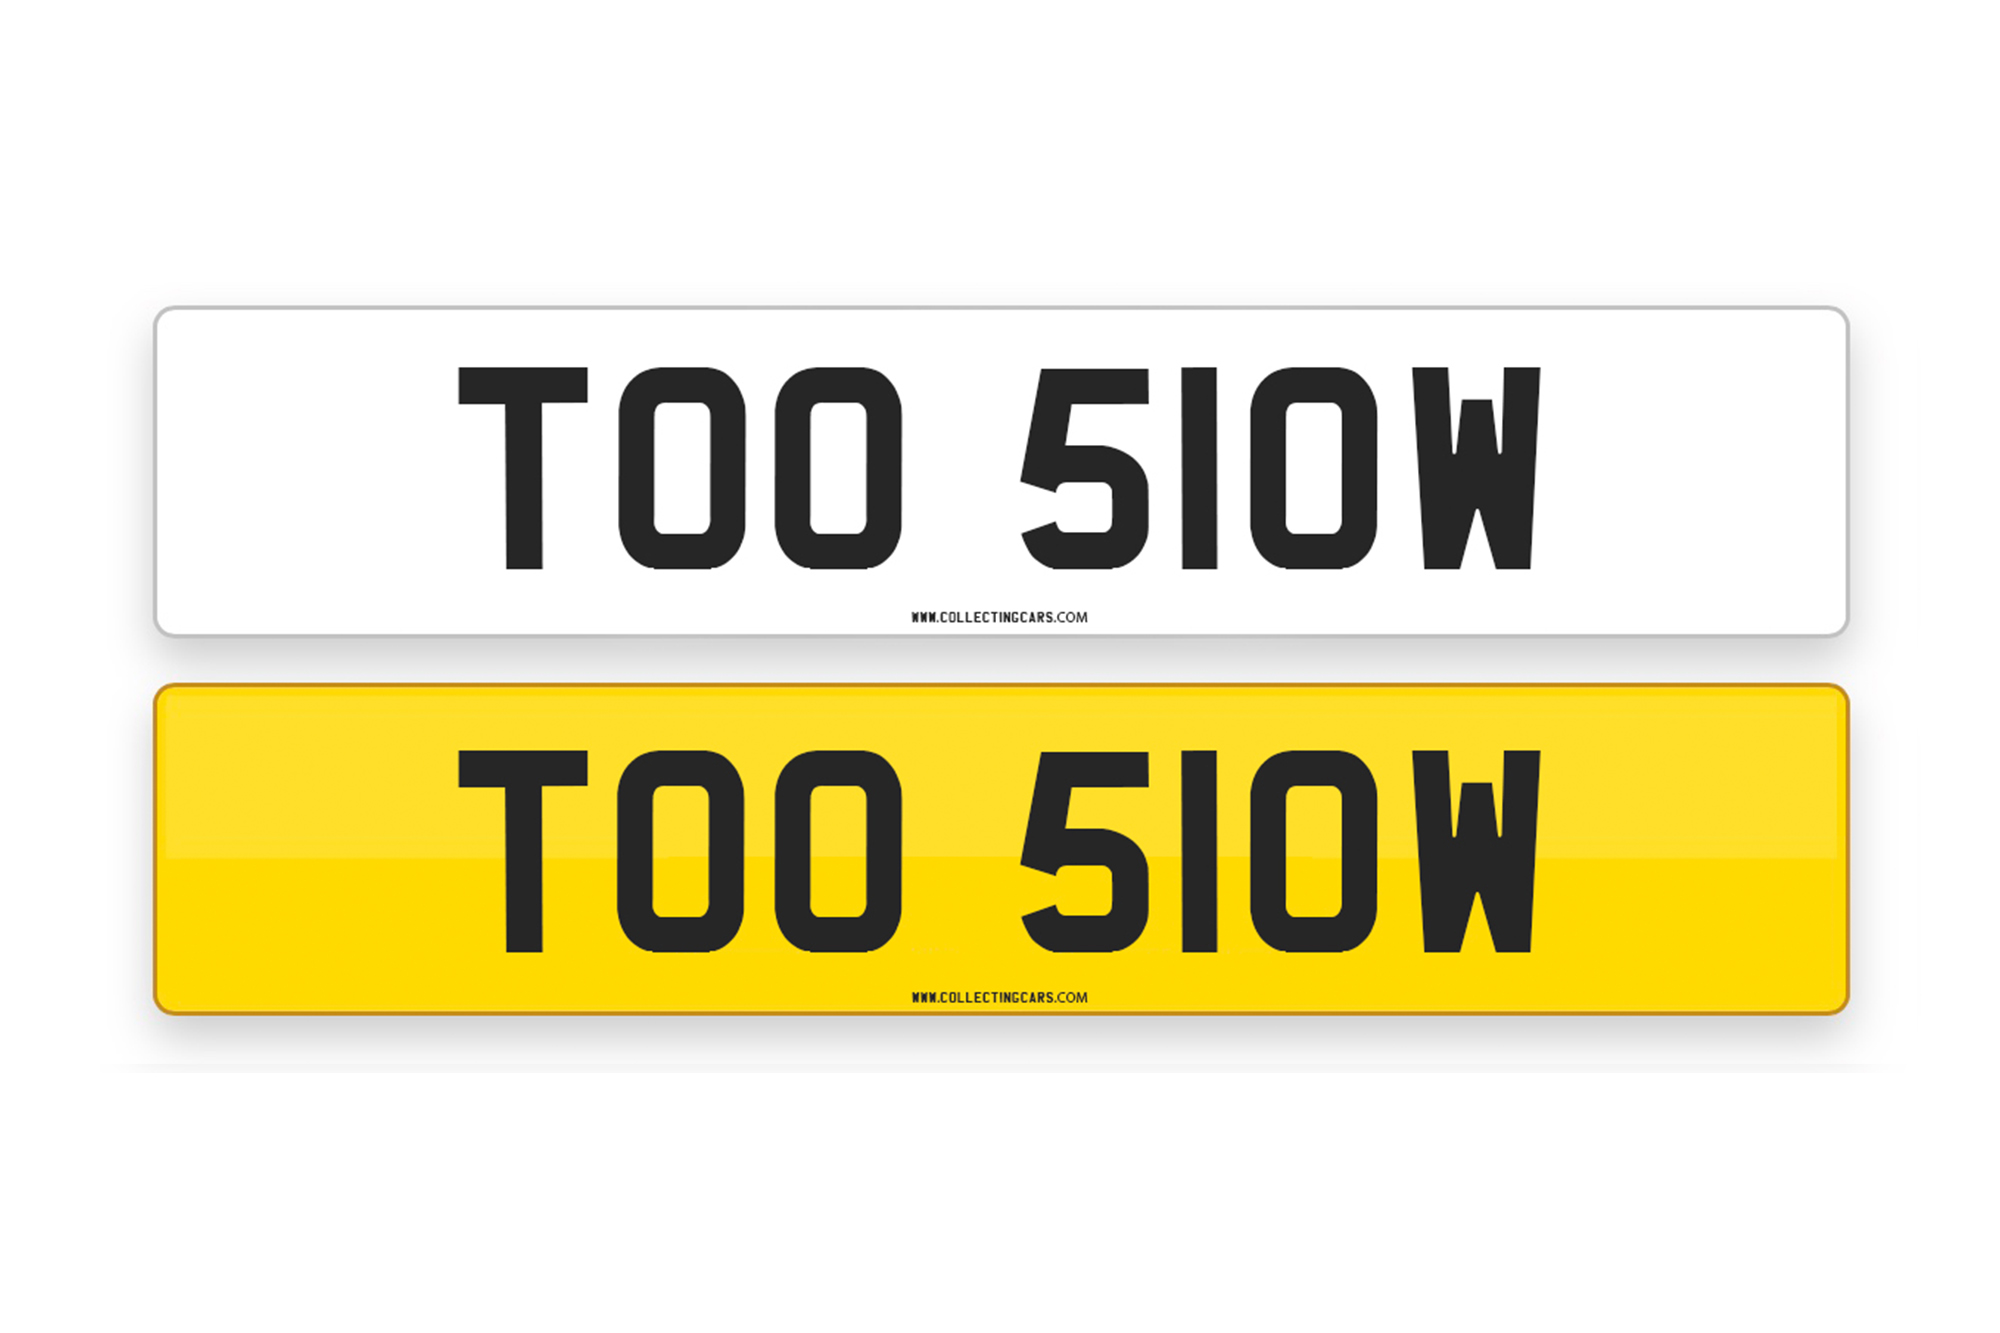 'TOO 510W' - NUMBER PLATE - Collecting Cars